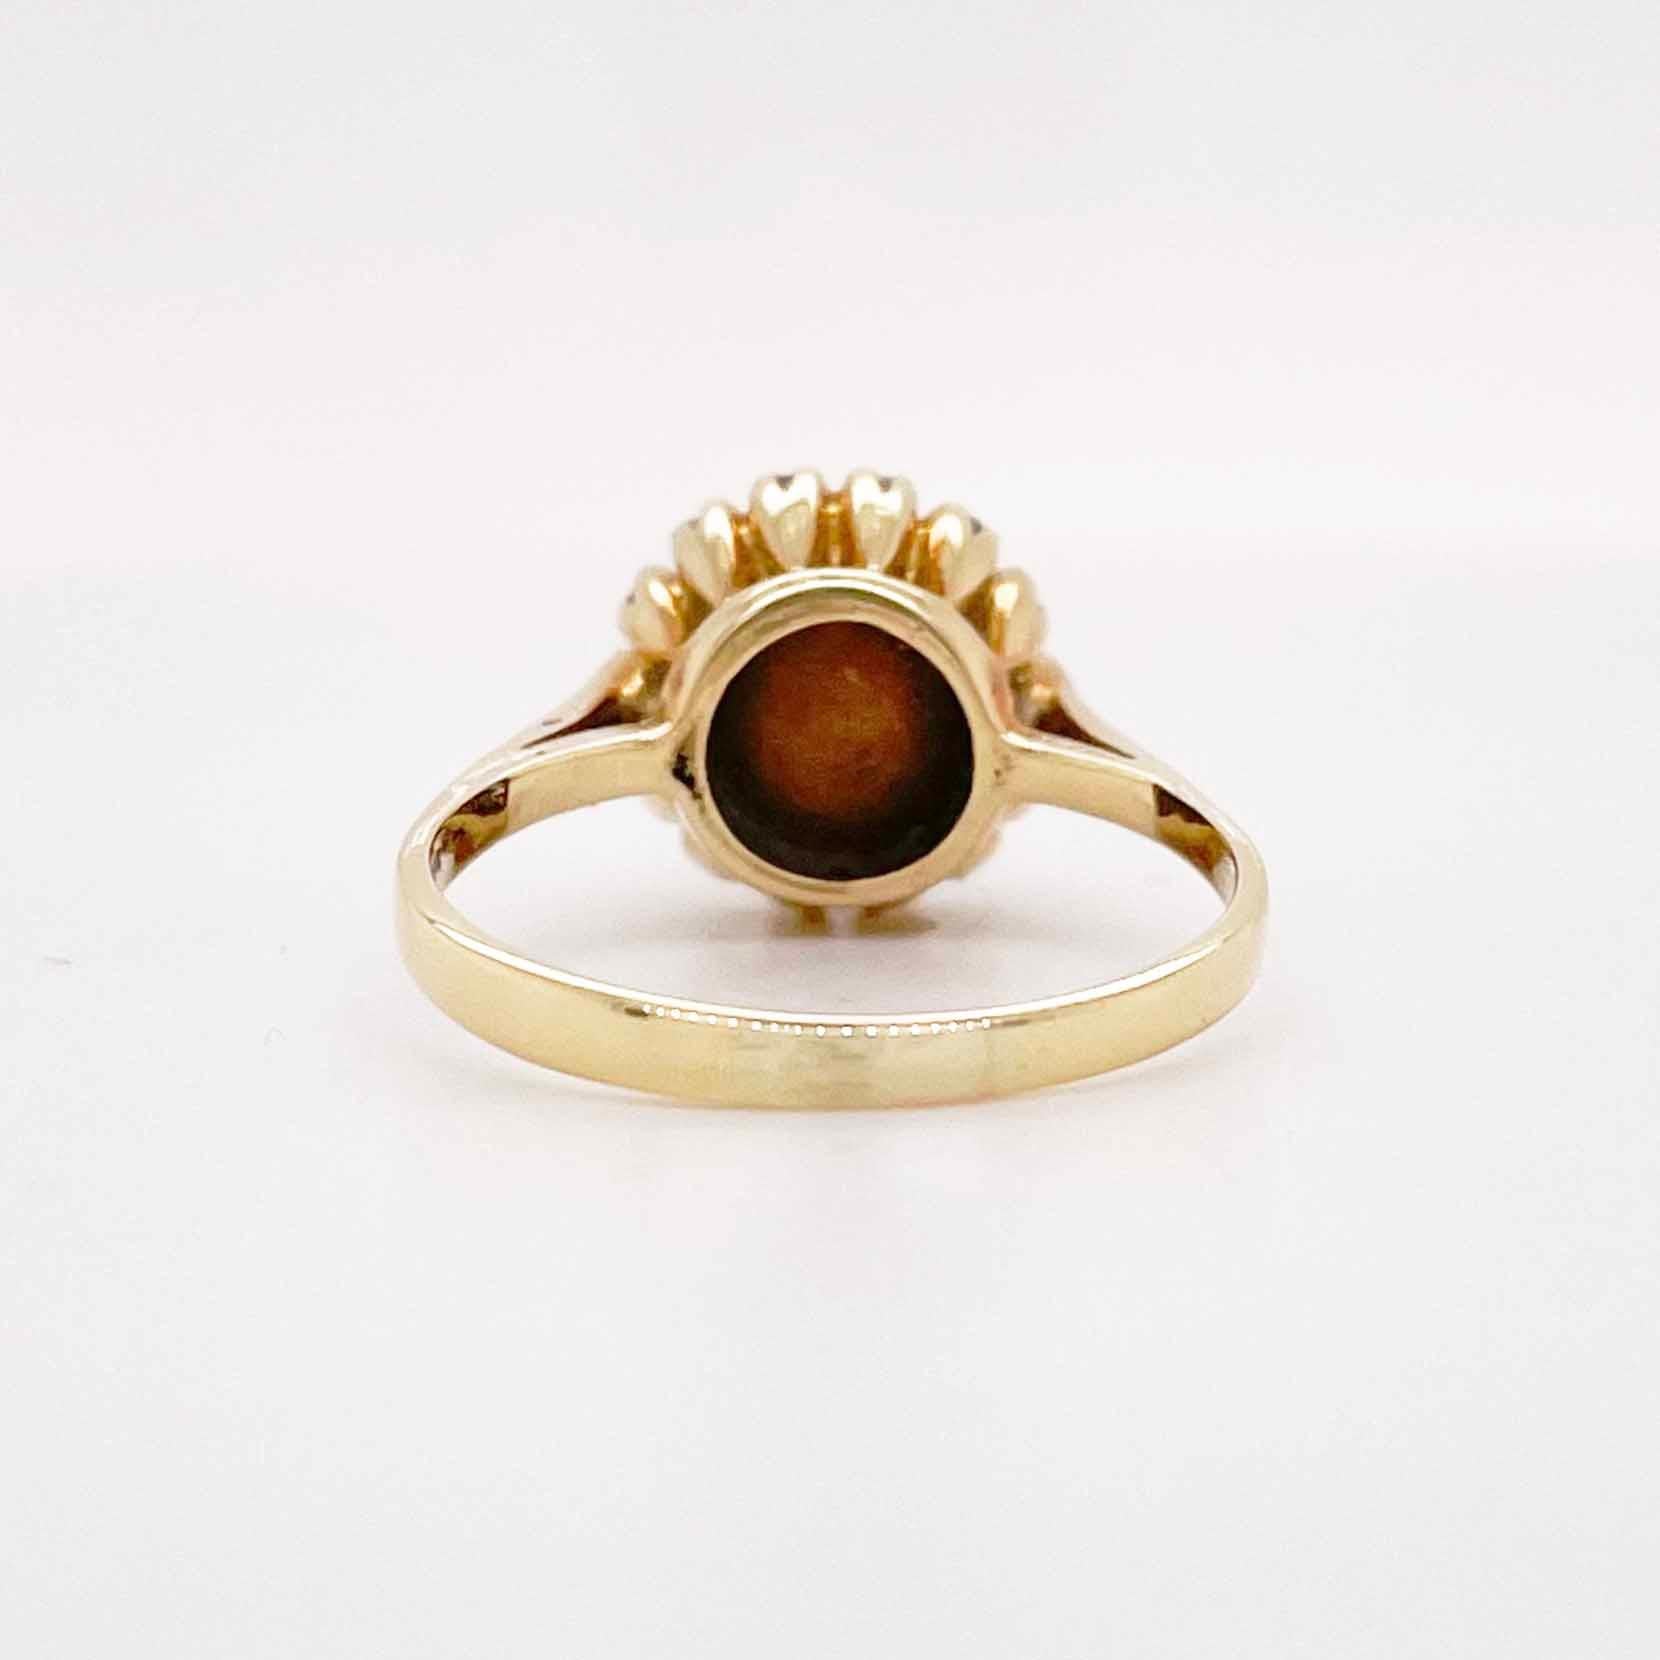 Contemporary Pearl Diamond Ring, Yellow Gold, Estate Cultured Pearl with Diamond Halo